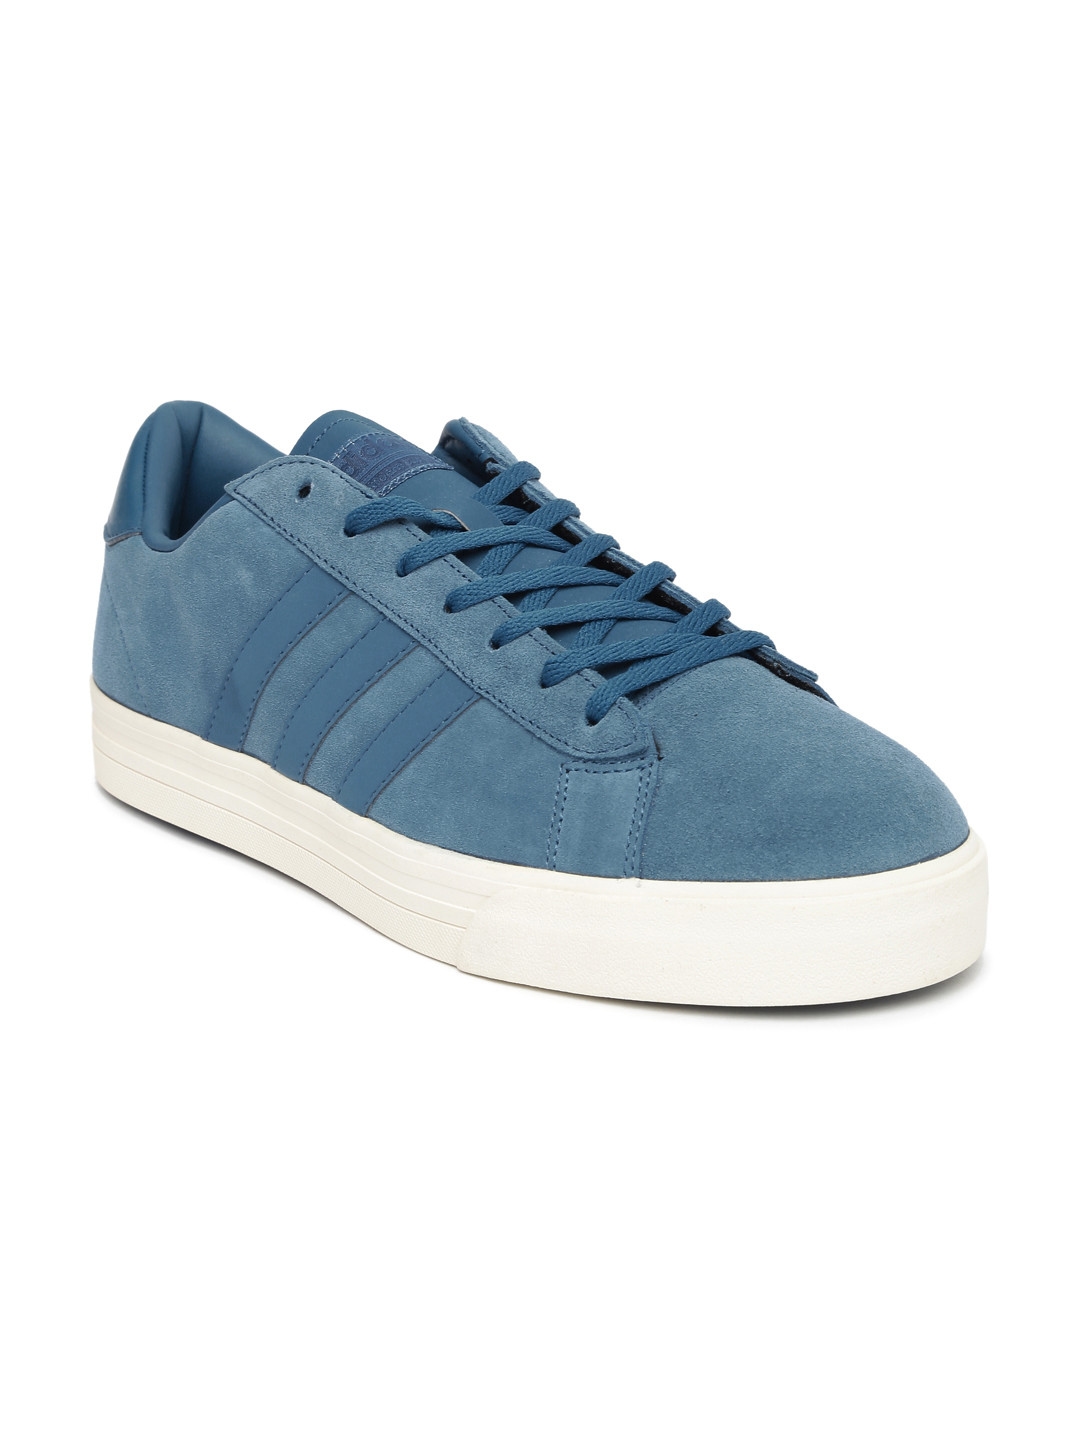 Buy ADIDAS NEO Men Blue Solid Suede Leather Cloudfoam Super Daily Sneakers - Casual Shoes for Men 1731091 Myntra